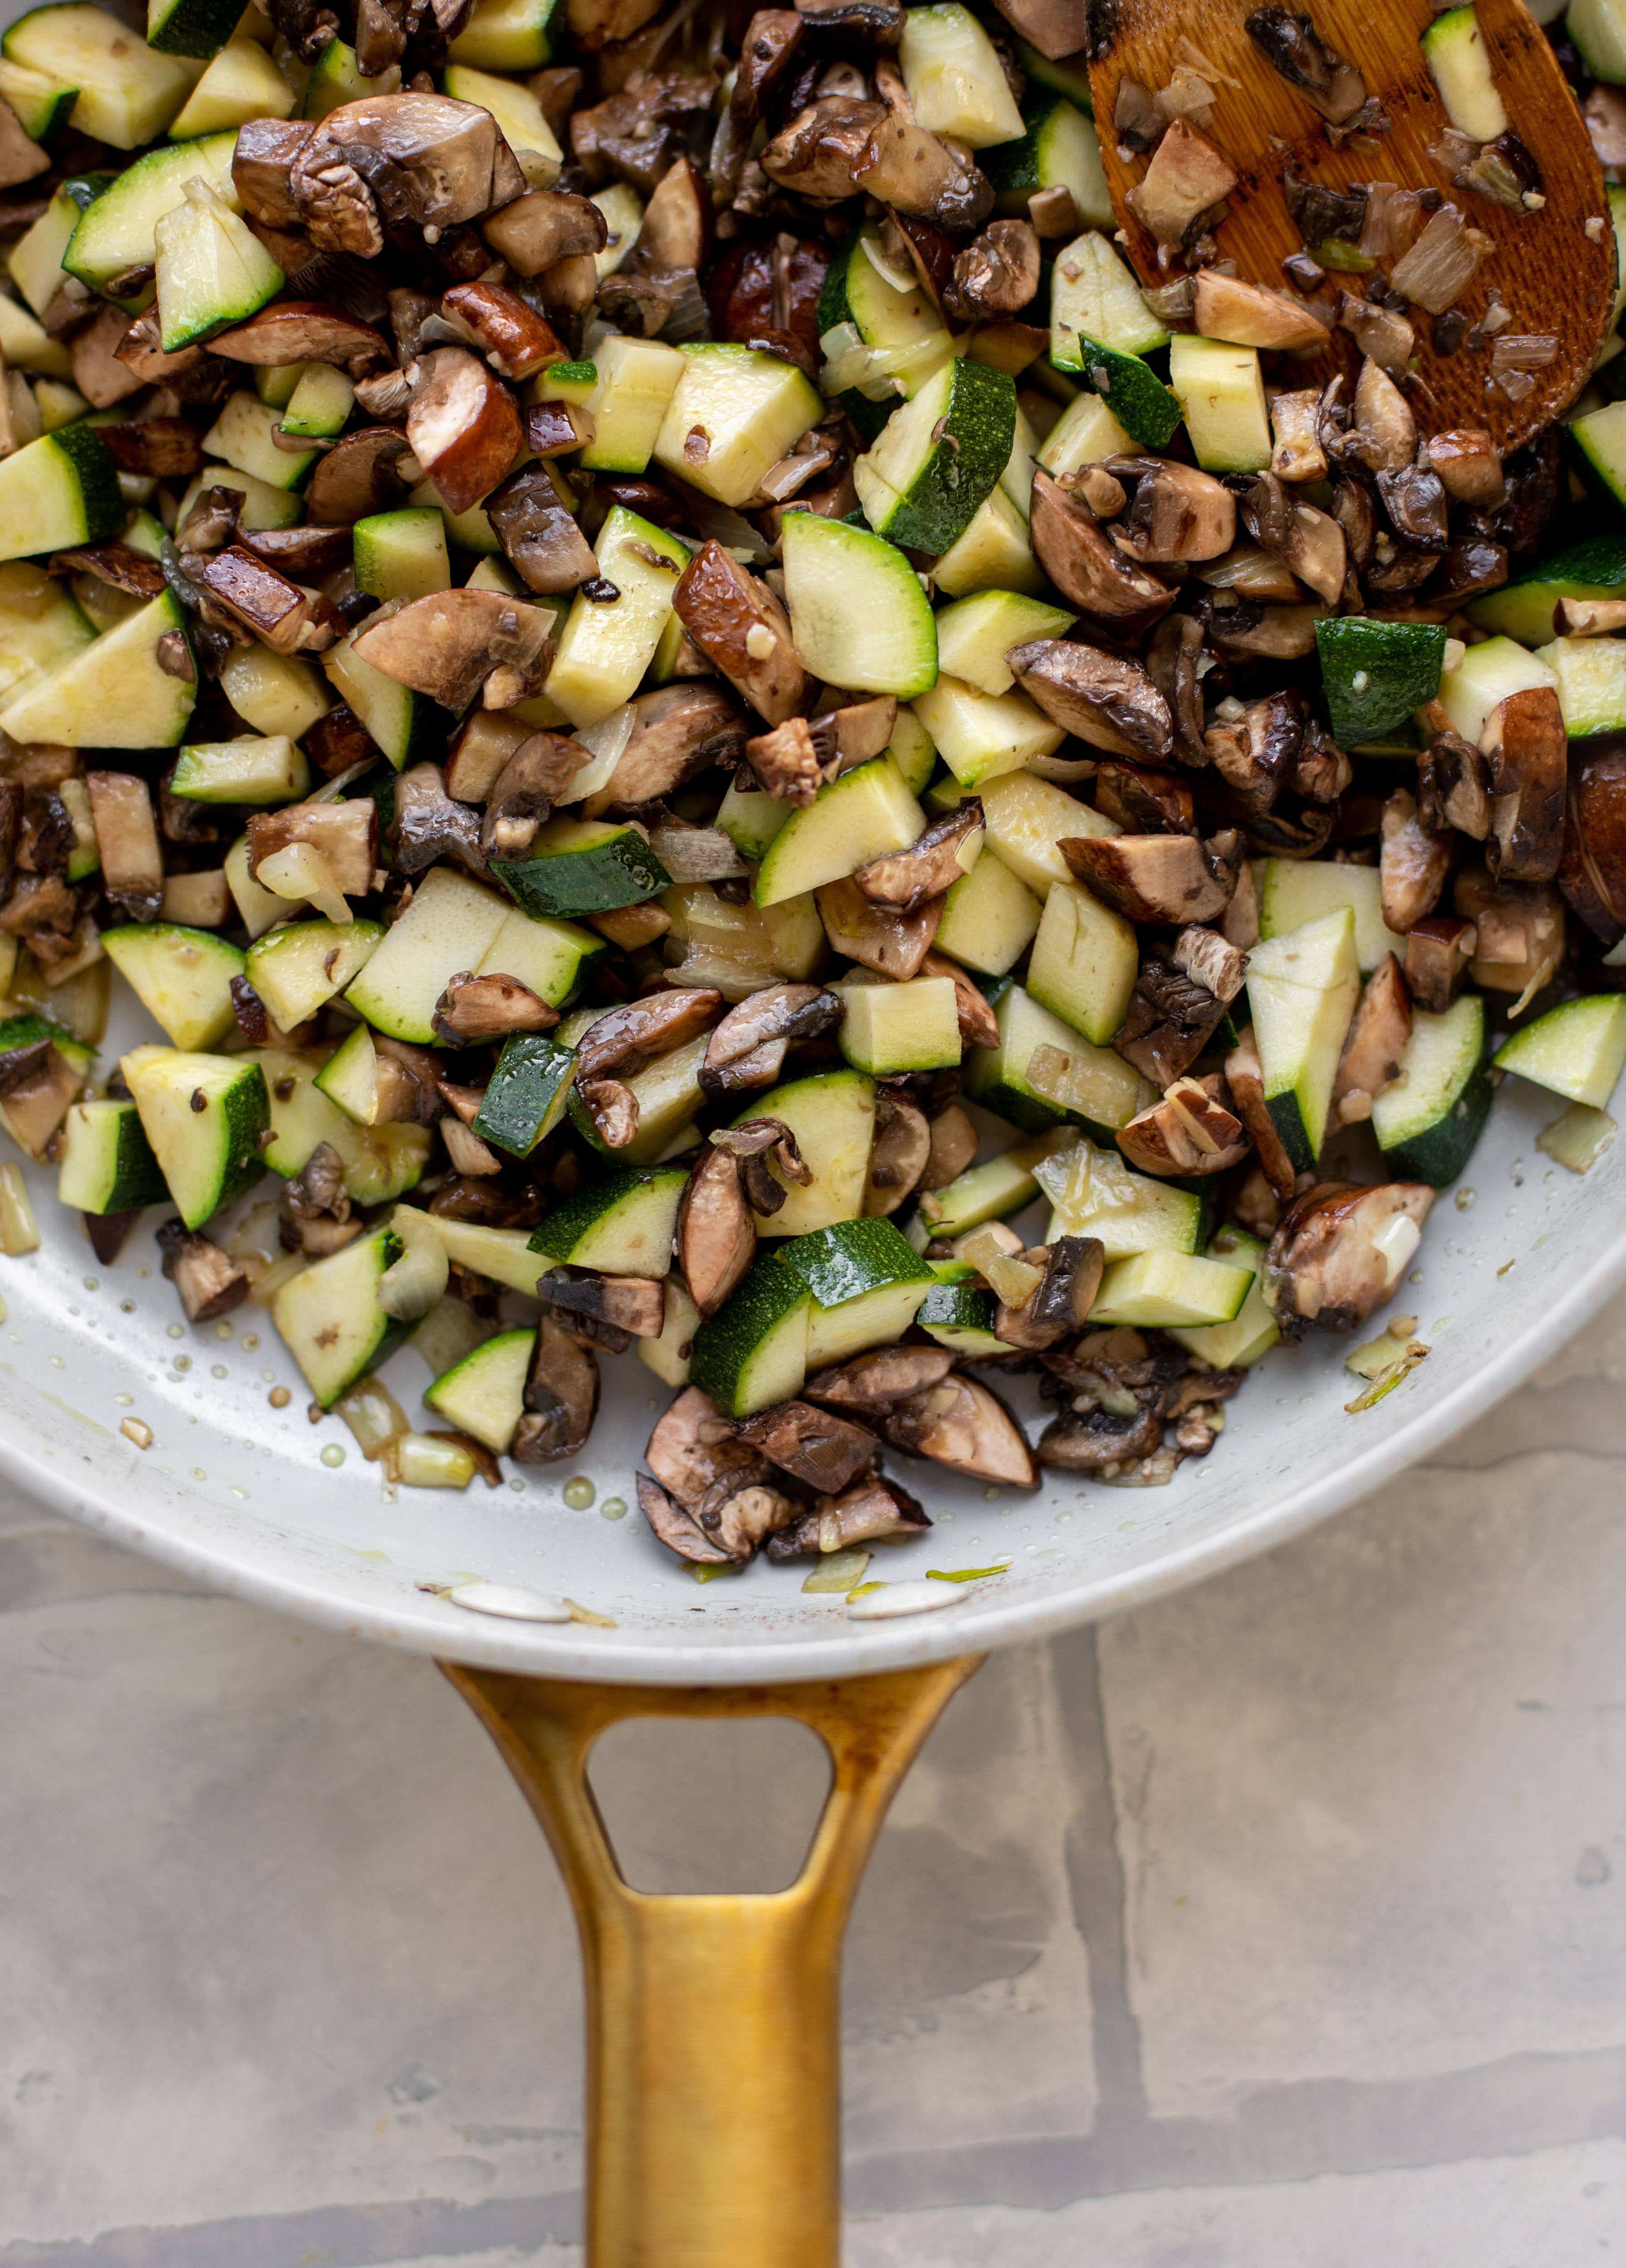 zucchini, mushrooms and onions in a skillet